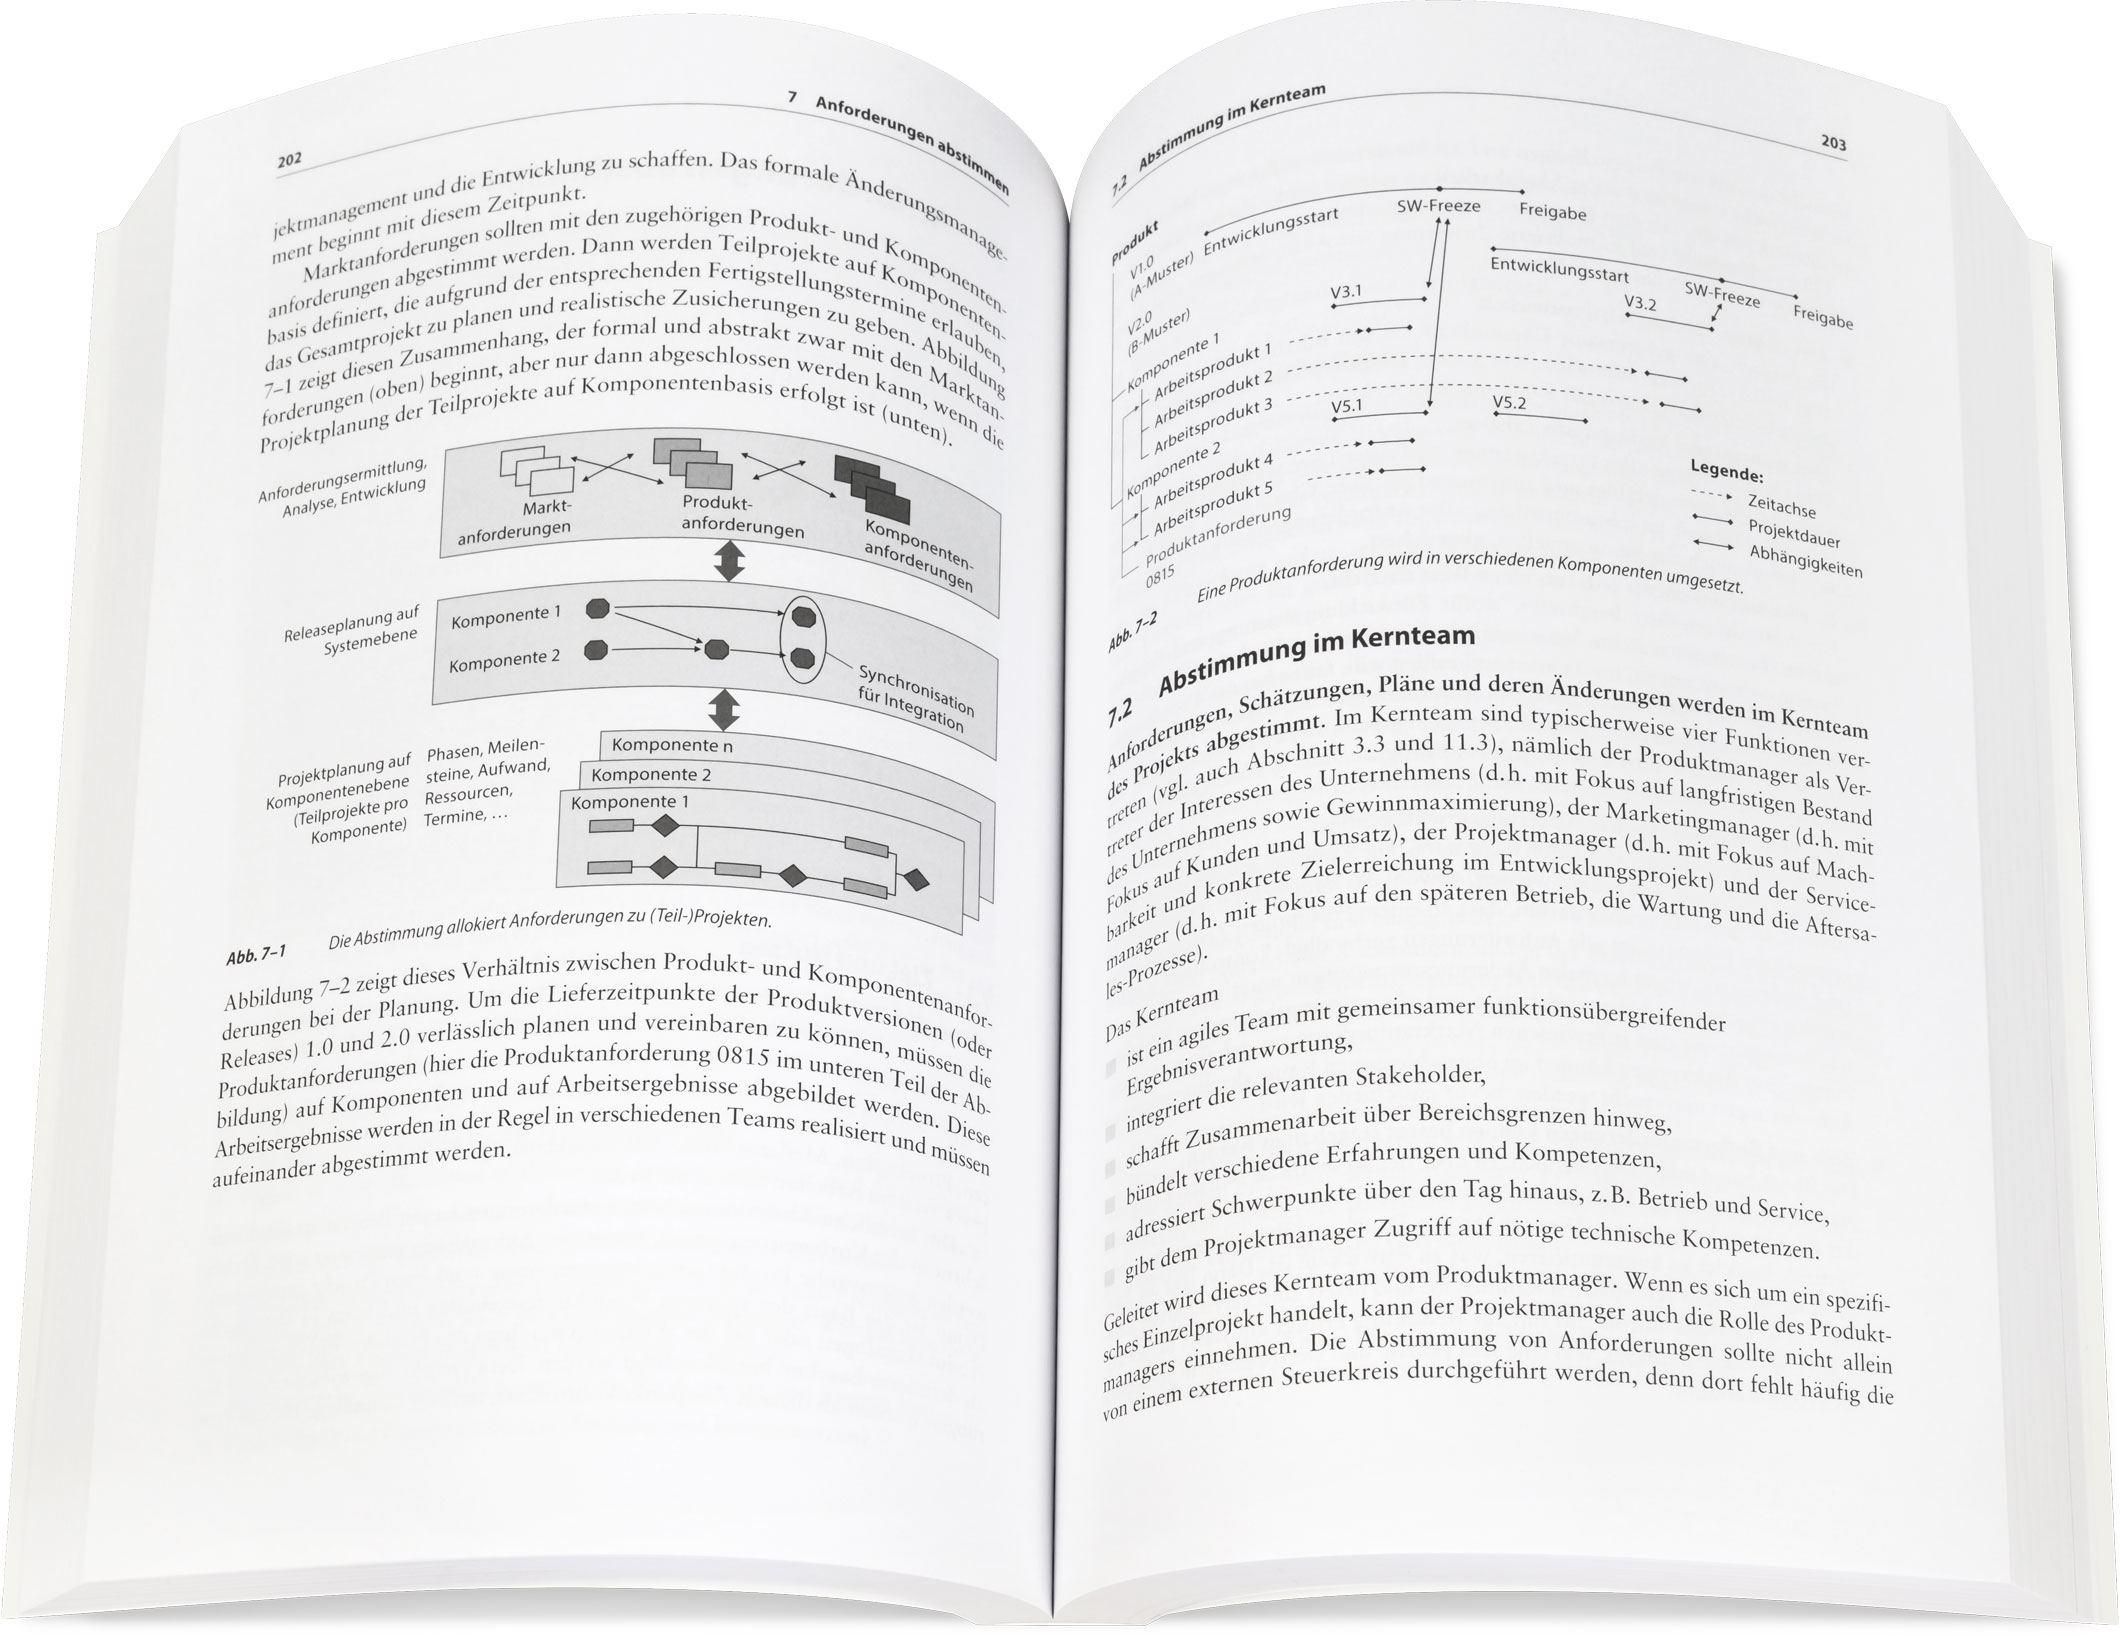 Blick ins Buch: Systematisches Requirements Engineering